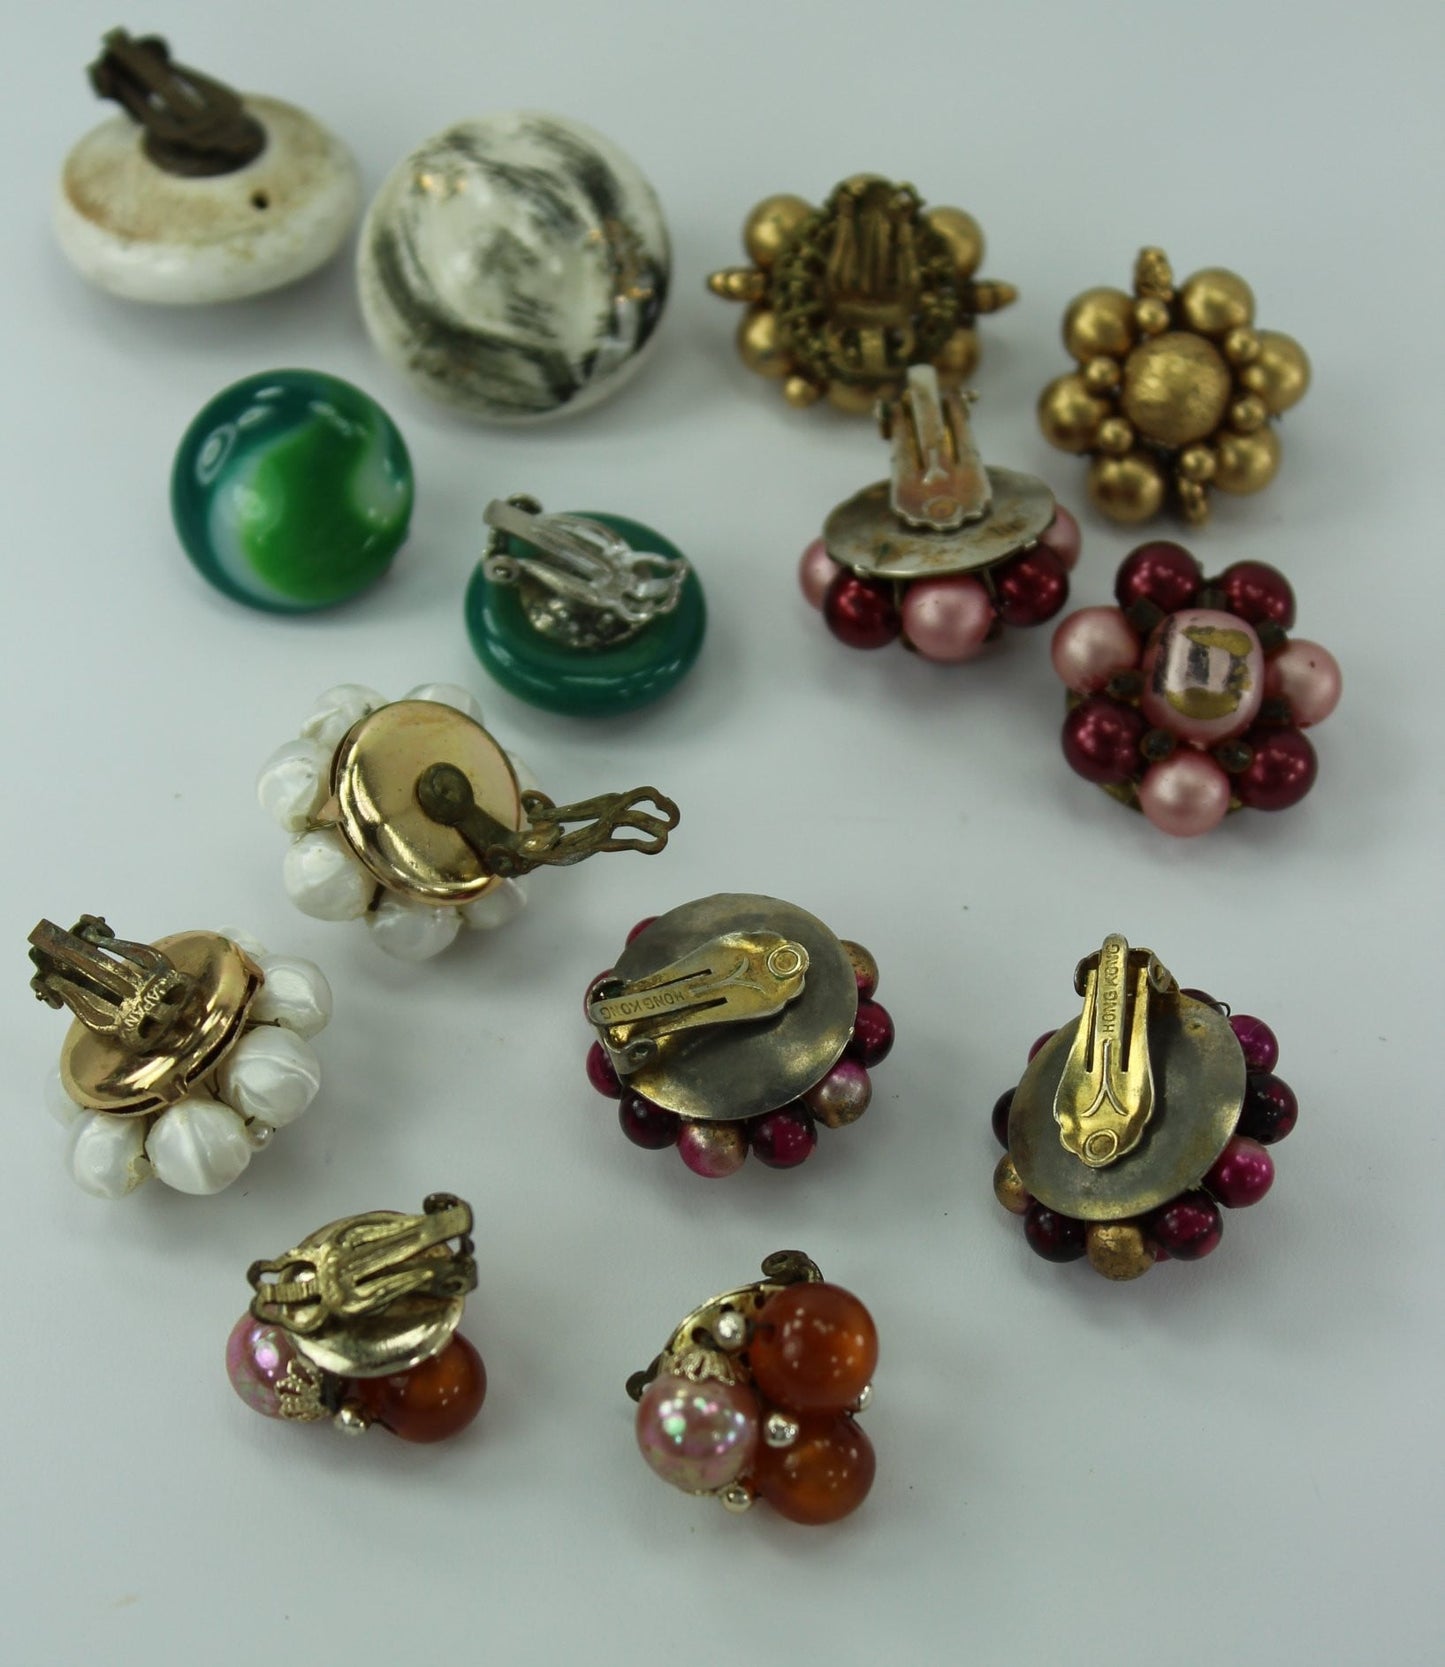 Vintage Earrings Clip Collection 7 Pairs Japan Hong Kong Bead Clusters Ceramic collectible